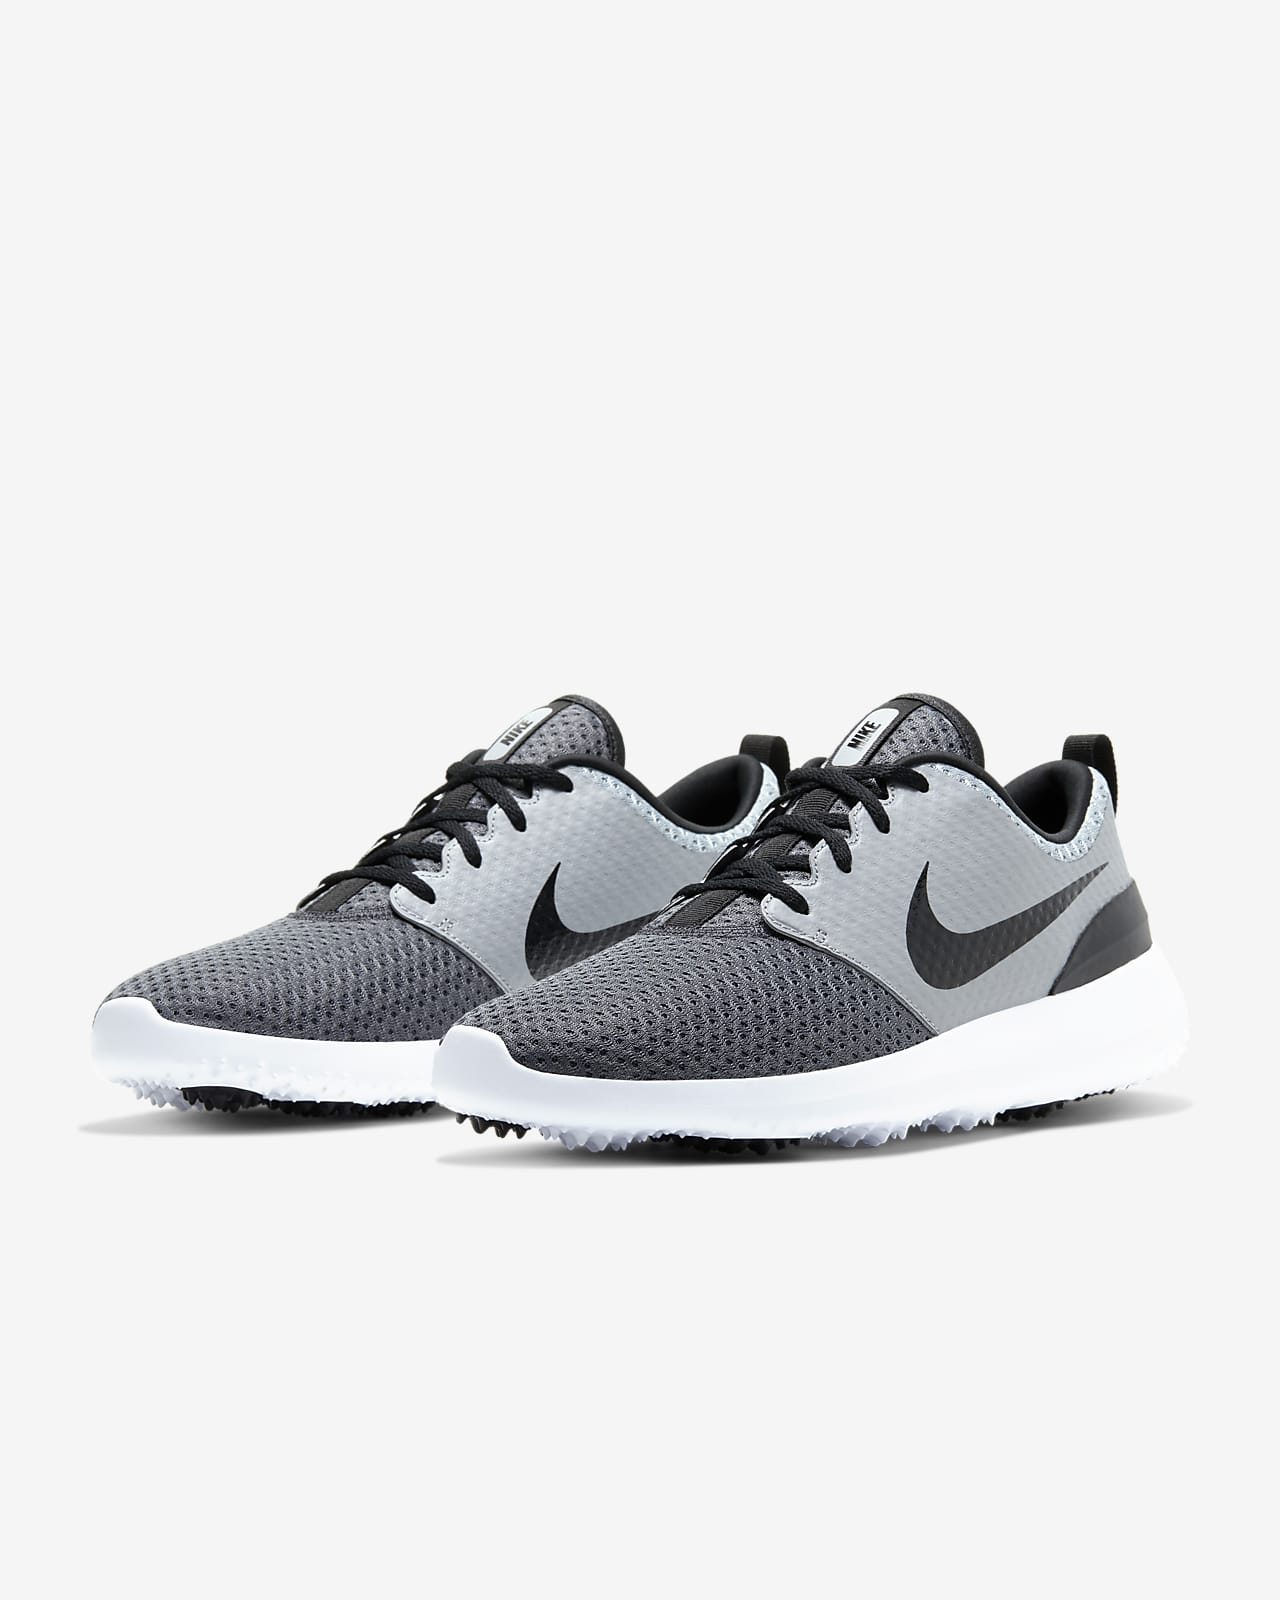 shoes similar to roshes